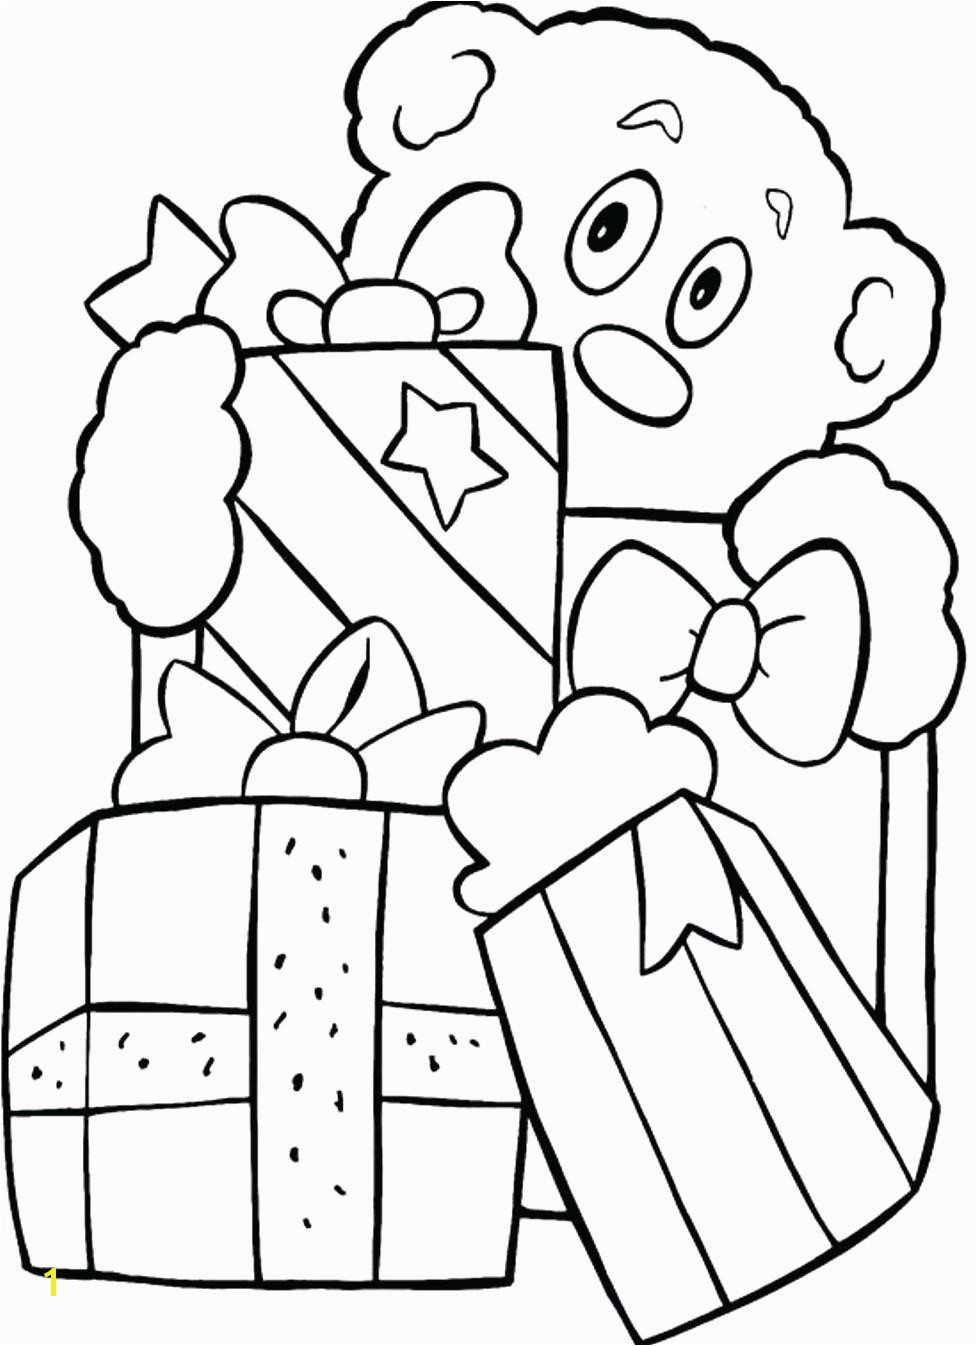 Christmas Printable Coloring Pages oriental Trading Coloring Page Free Christmas Printable Coloring Pages oriental